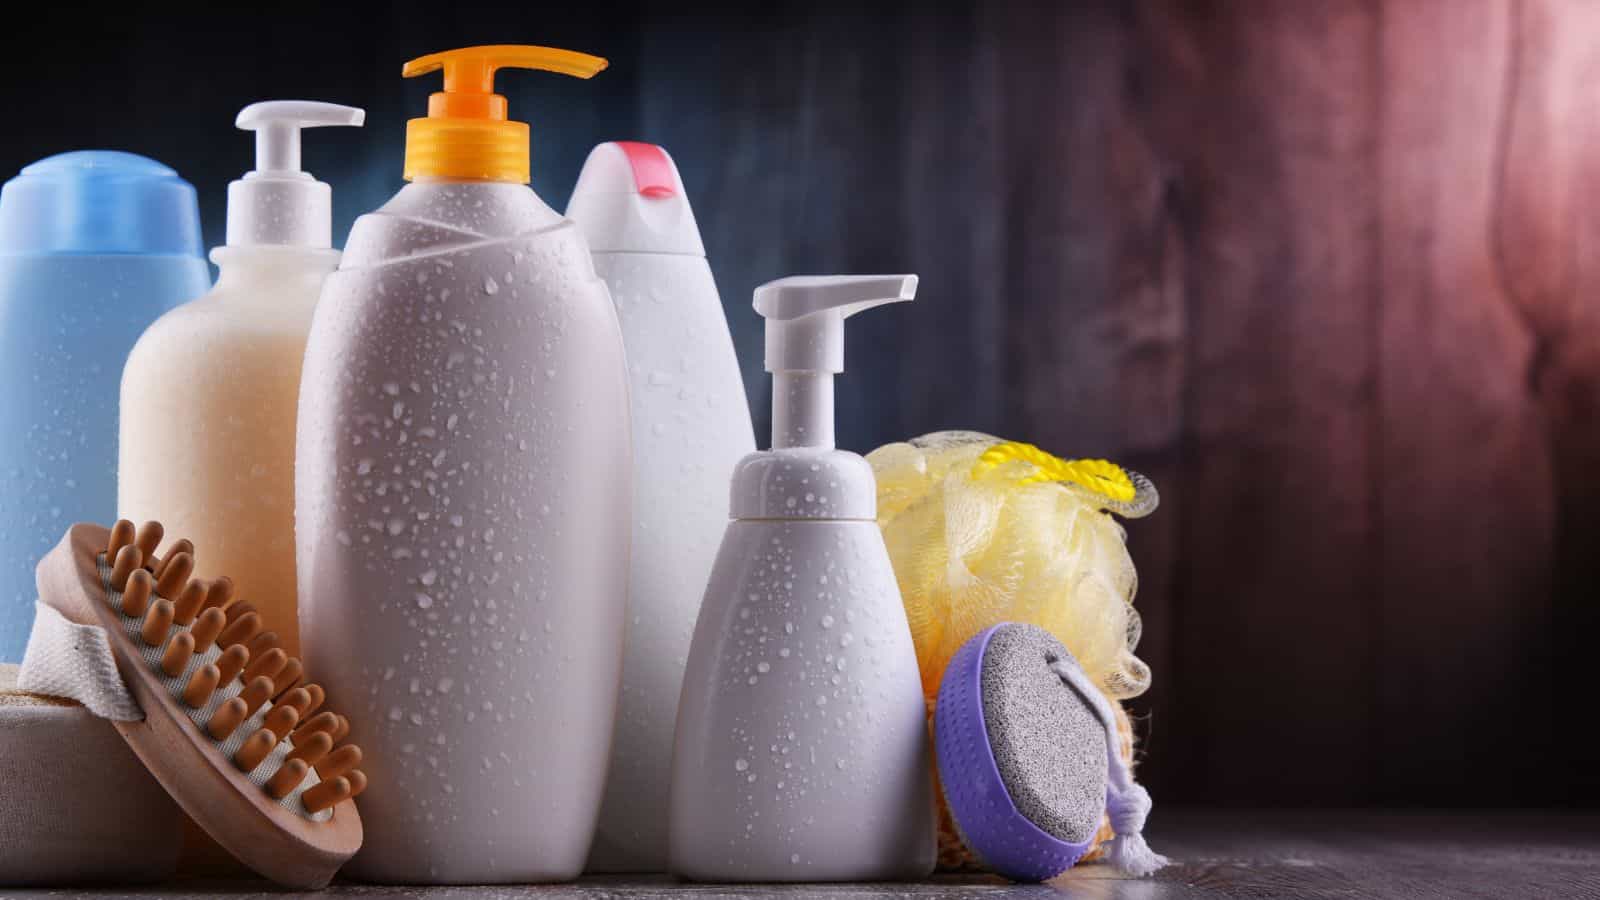 <p>Ever get the feeling that your shampoo runs out faster than it used to? You’re not imagining it! Bottles are getting slimmer while prices puff up. Talk about washing your money down the drain!</p>